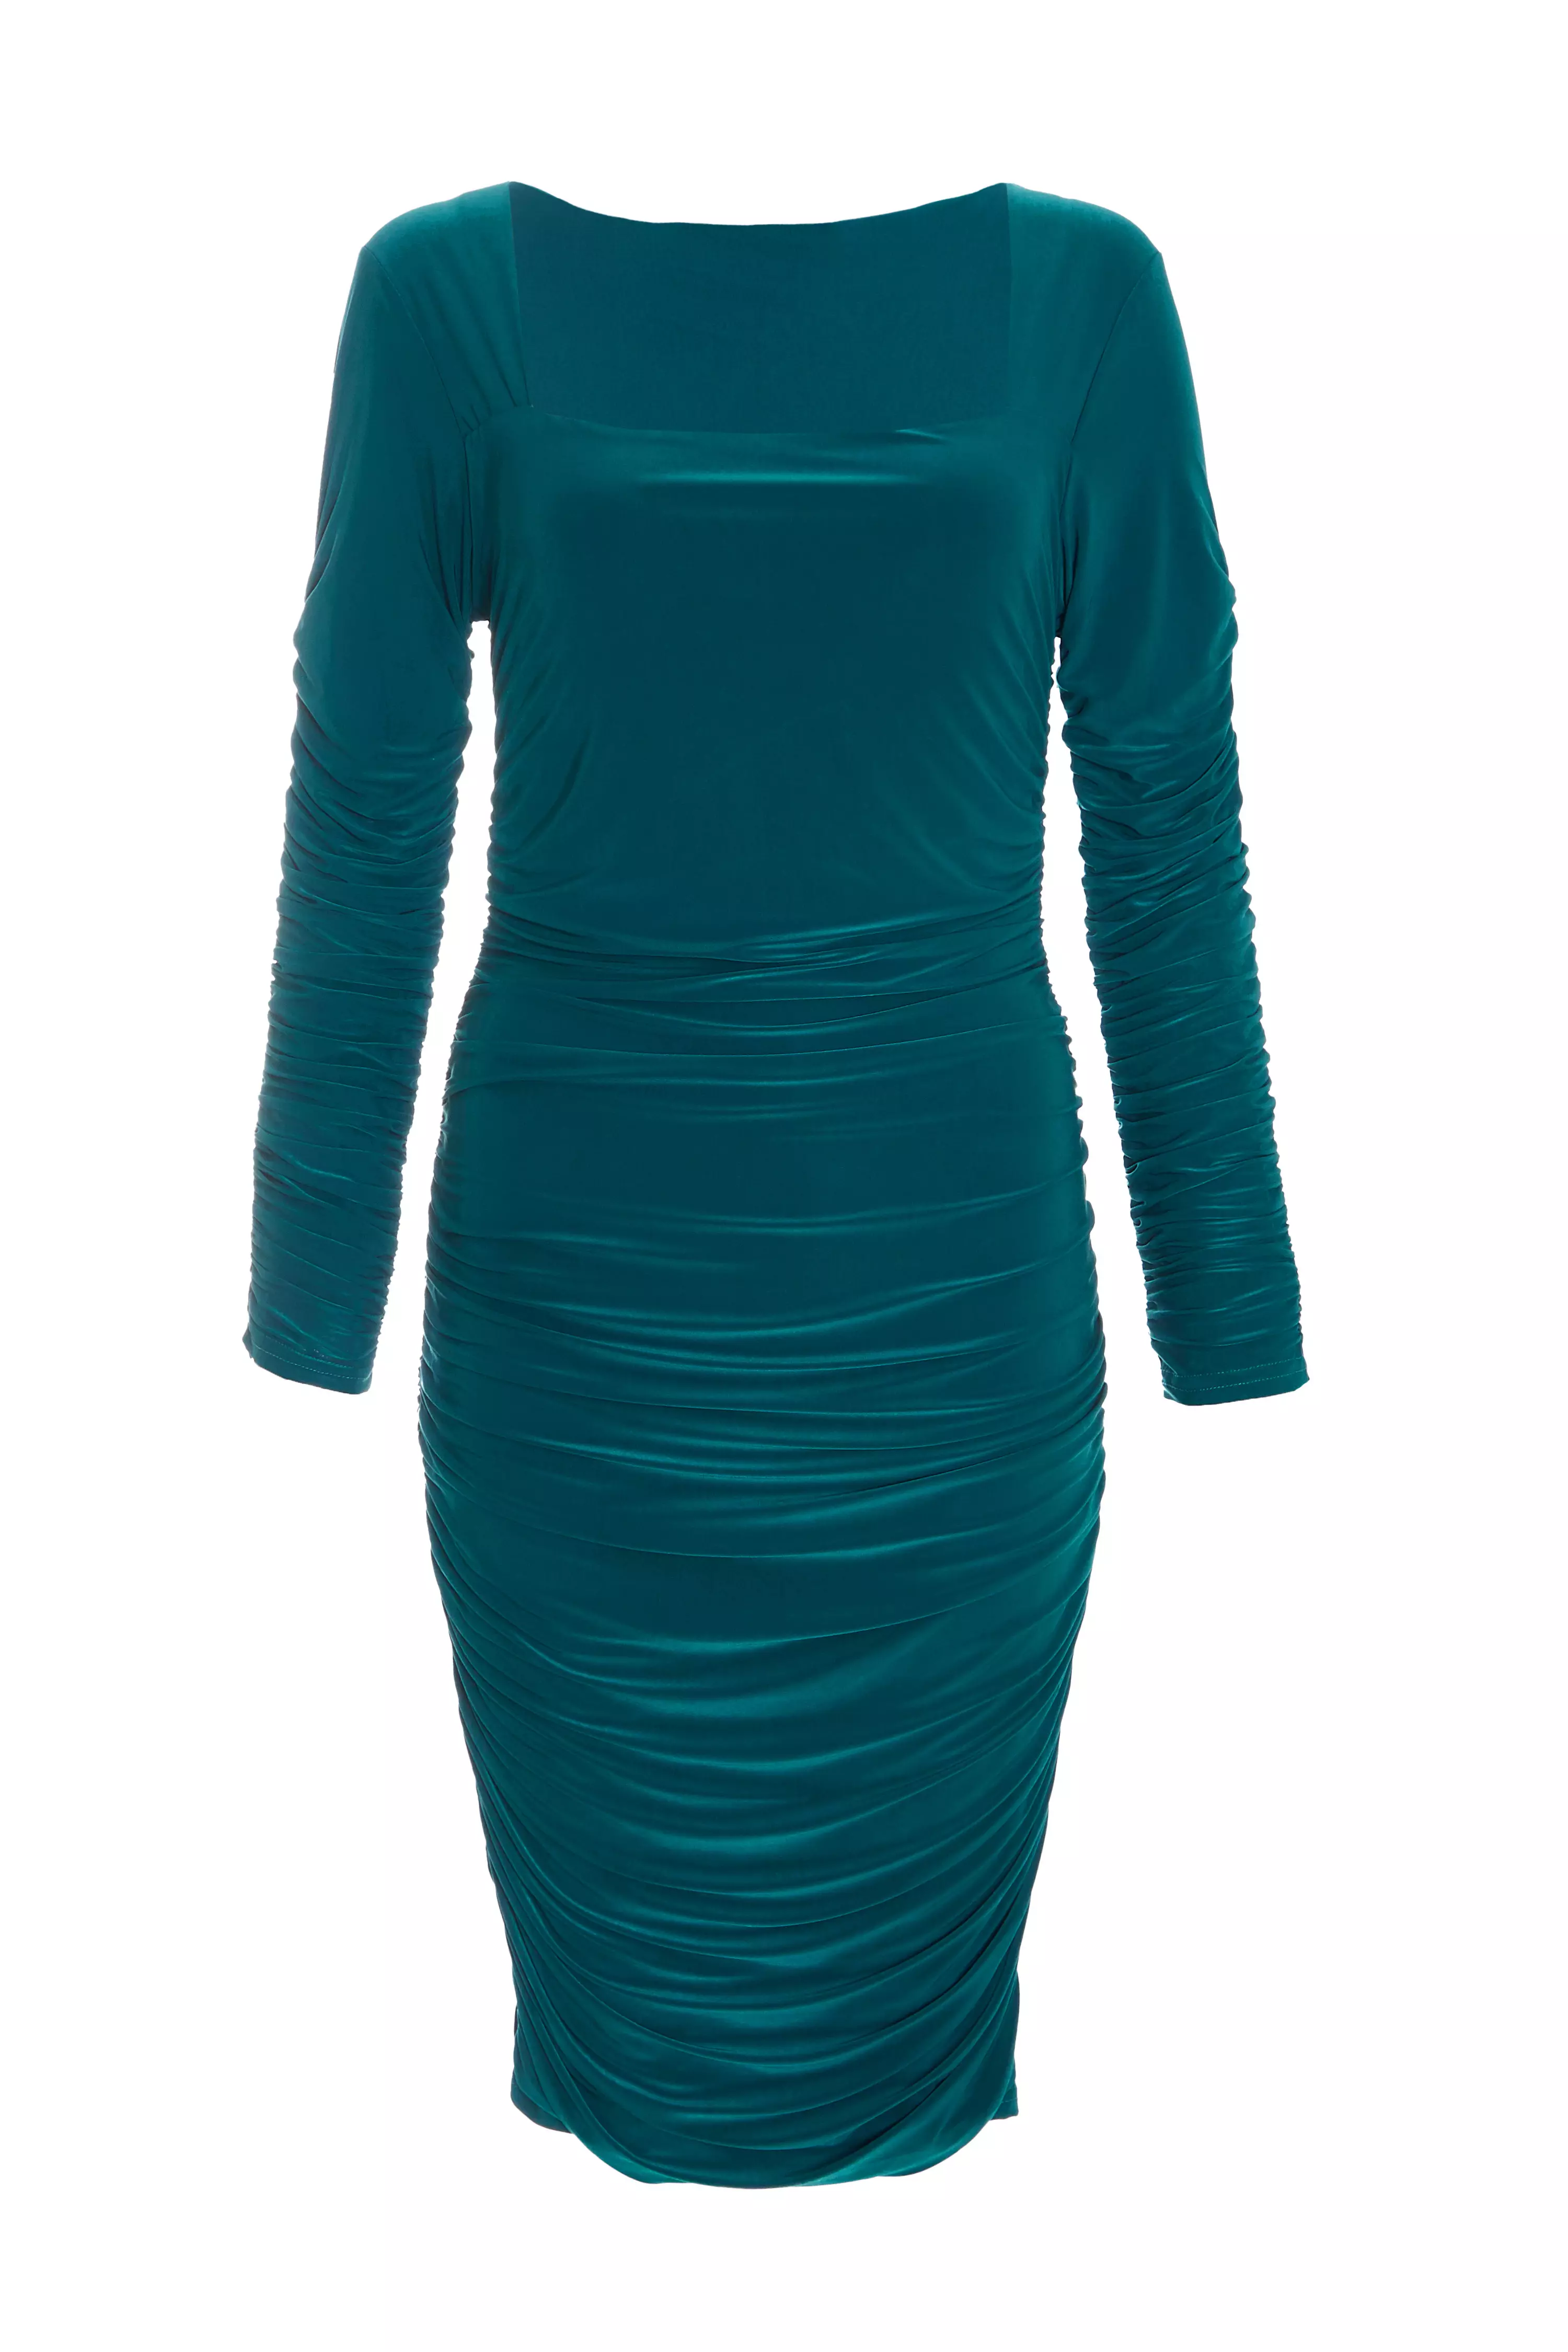 Teal Ruched Long Sleeve Midi Dress